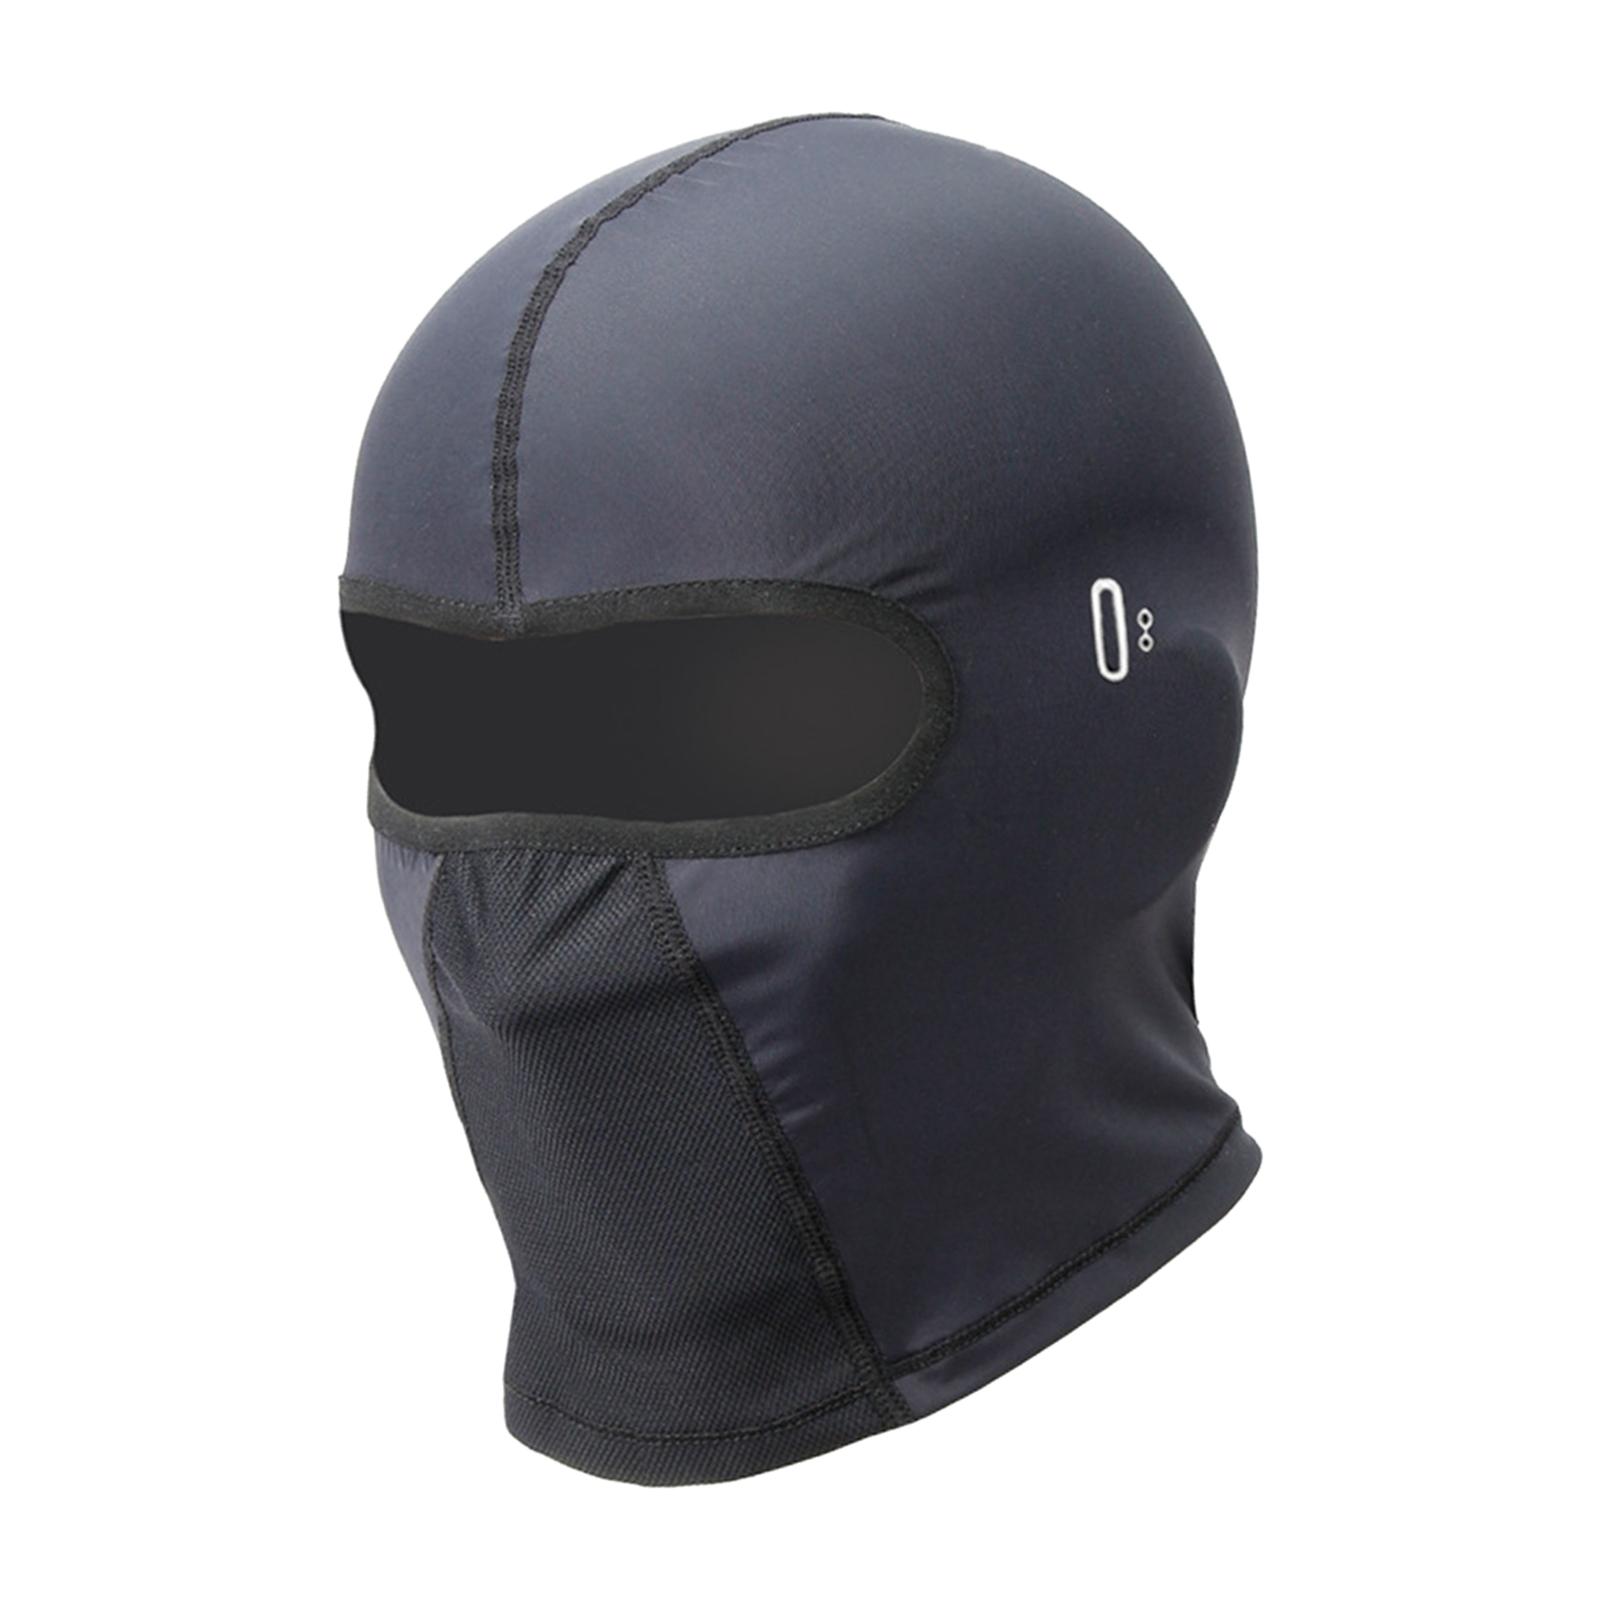 Ice Silk Balaclava Face Mask Headgear Windproof for Hunting Riding Hiking with Glasses Hole